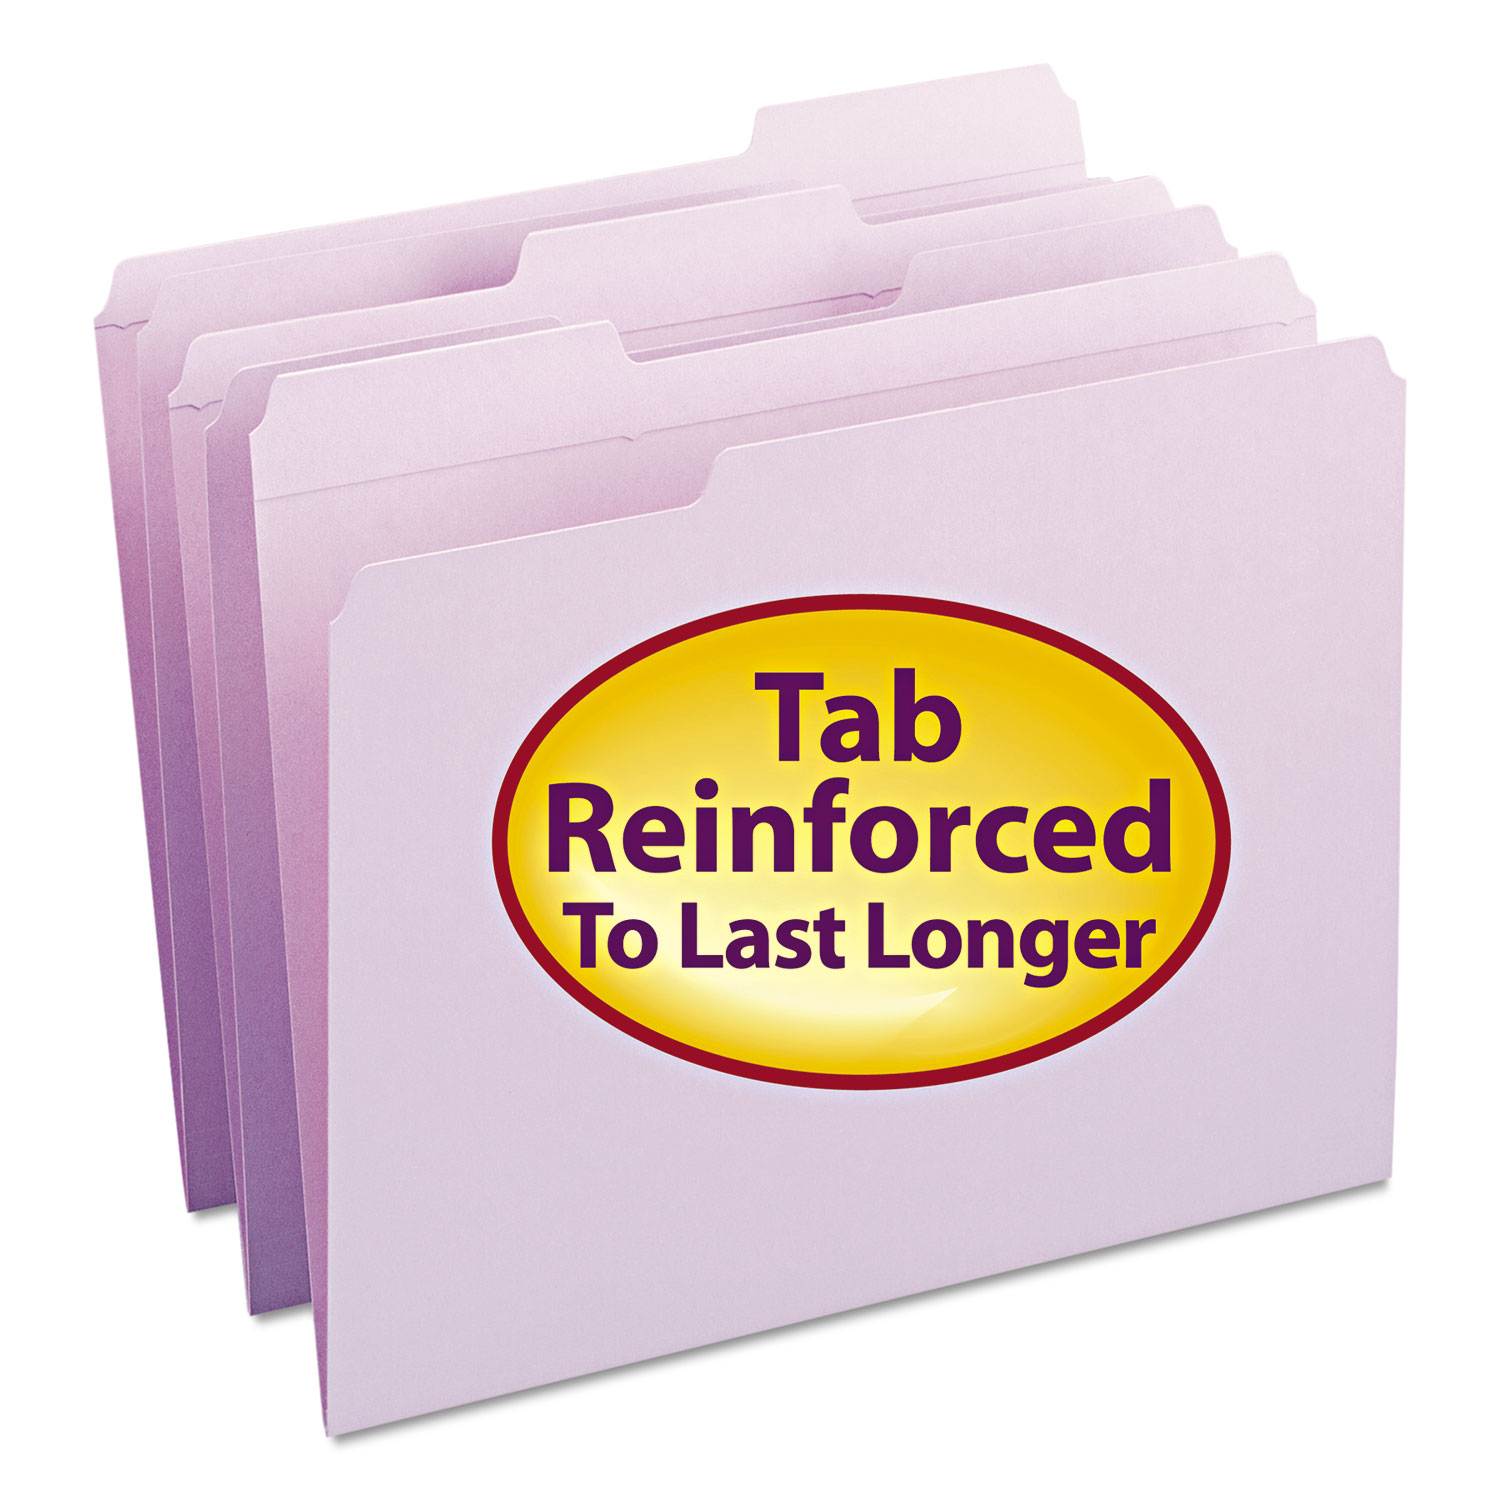  Smead 12434 Reinforced Top Tab Colored File Folders, 1/3-Cut Tabs, Letter Size, Lavender, 100/Box (SMD12434) 